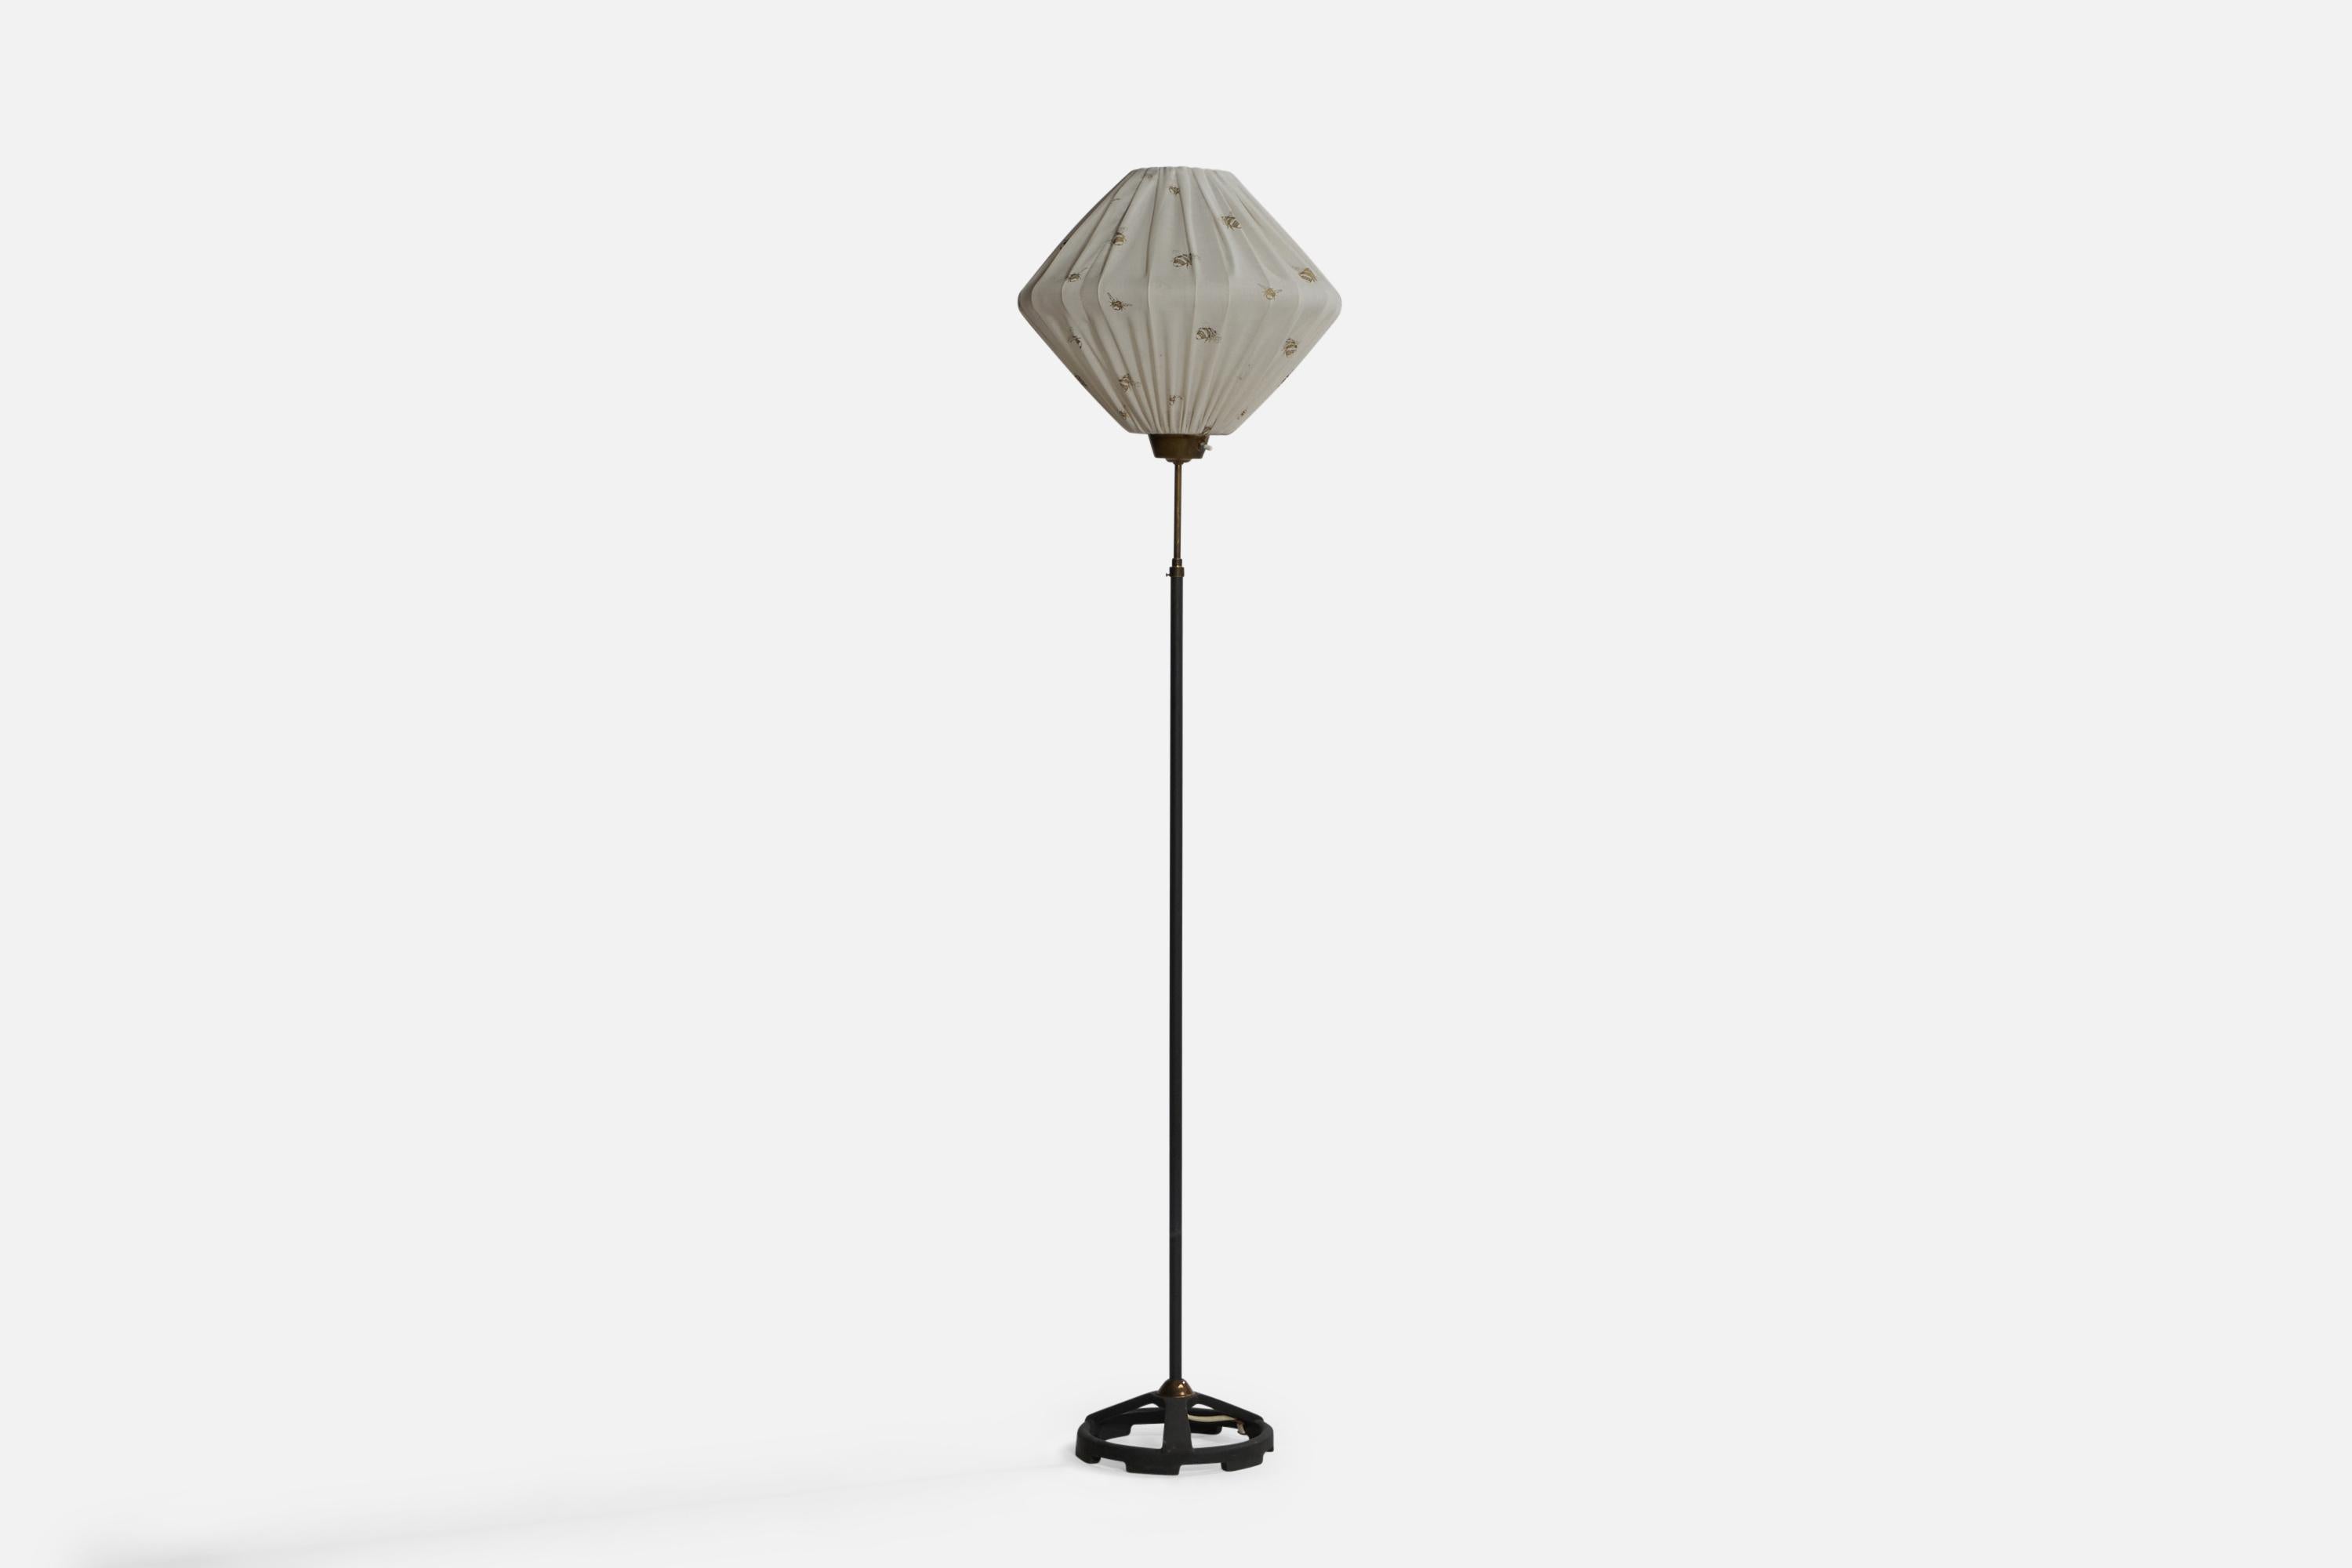 A brass, black-painted iron and printed off-white fabric floor lamp designed and produced in Sweden, c. 1950s.

Overall Dimensions (inches): 61” x 15.5” Diameter. Stated dimensions include shade.
Bulb Specifications: E-26 Bulb
Number of Sockets: